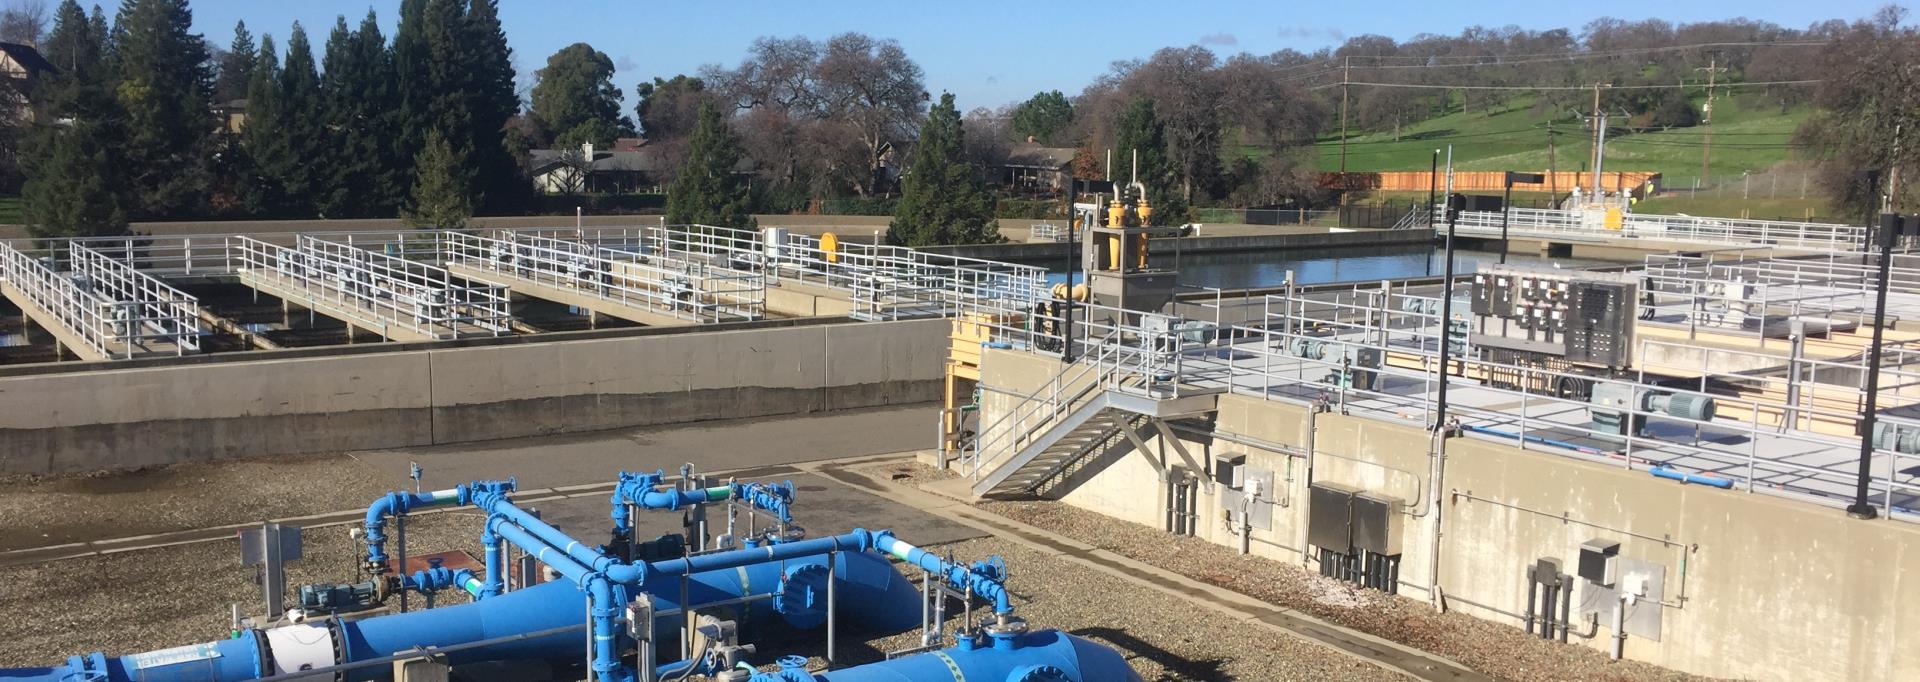 view across water treatment plant facility showing equipment and treatment ponds